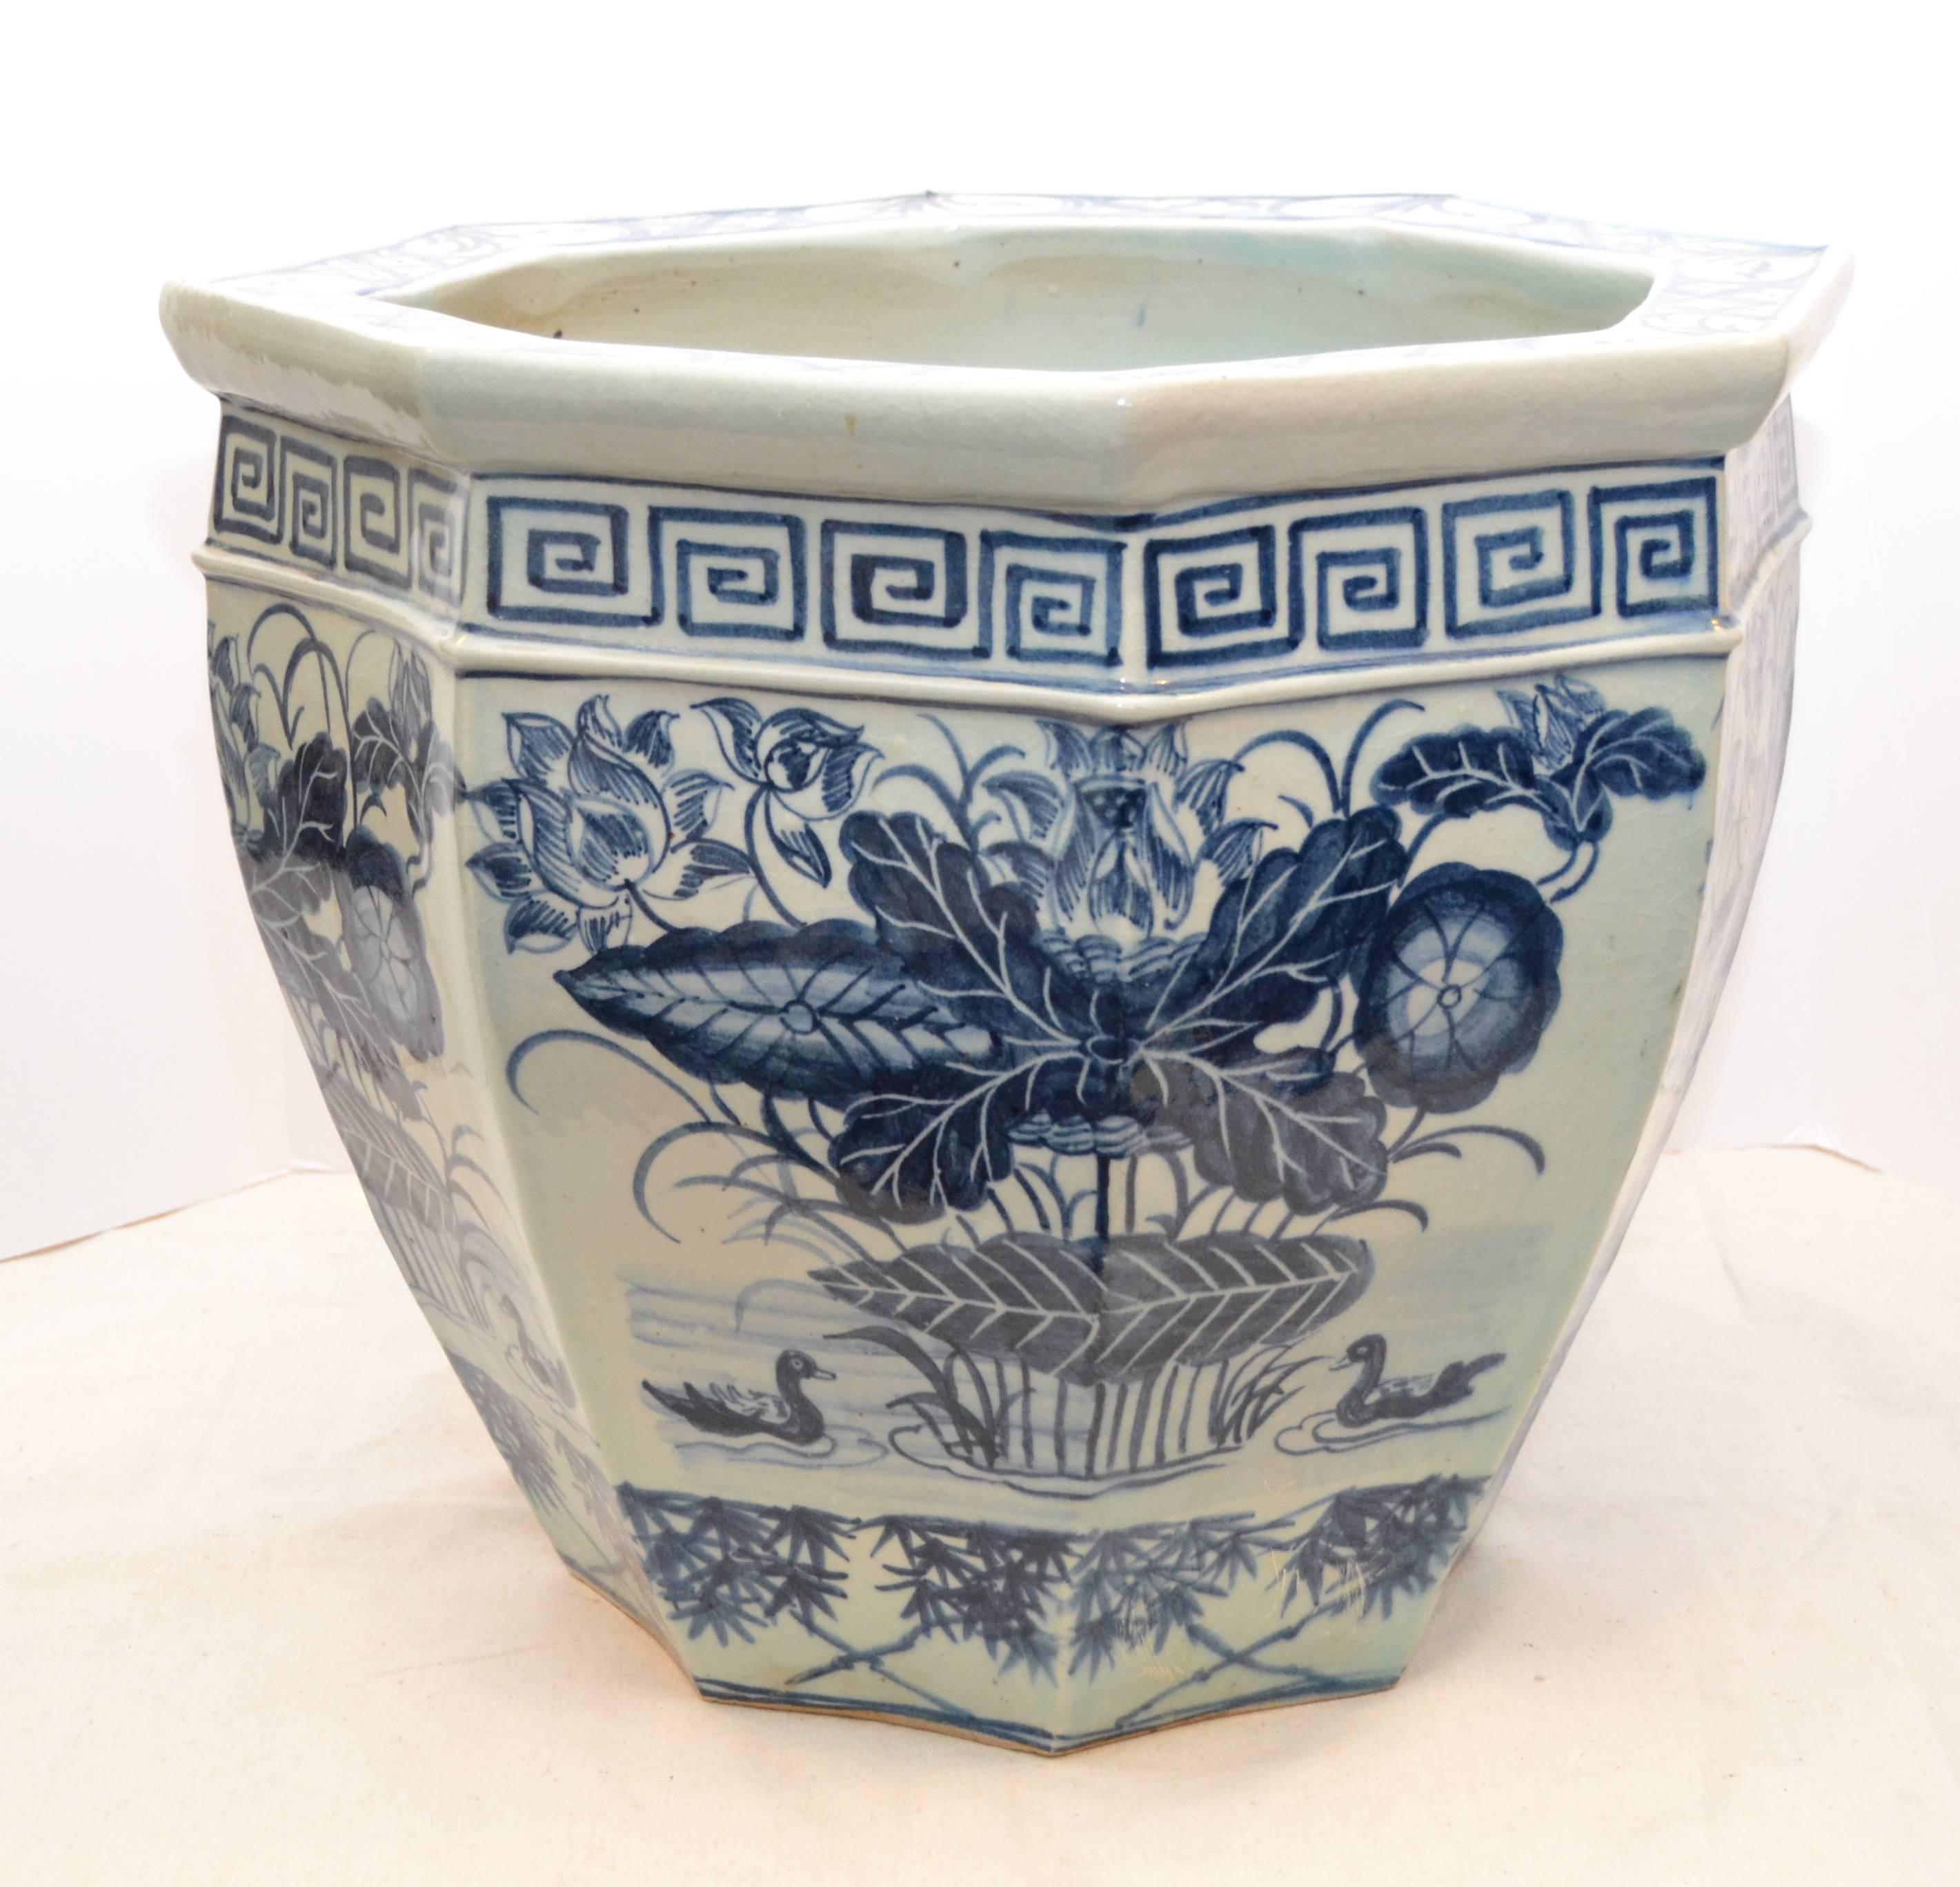 Pair of Chinese blue and white octagonal fish bowls with water lily and waterfowl motifs. Greek key motif around neck.